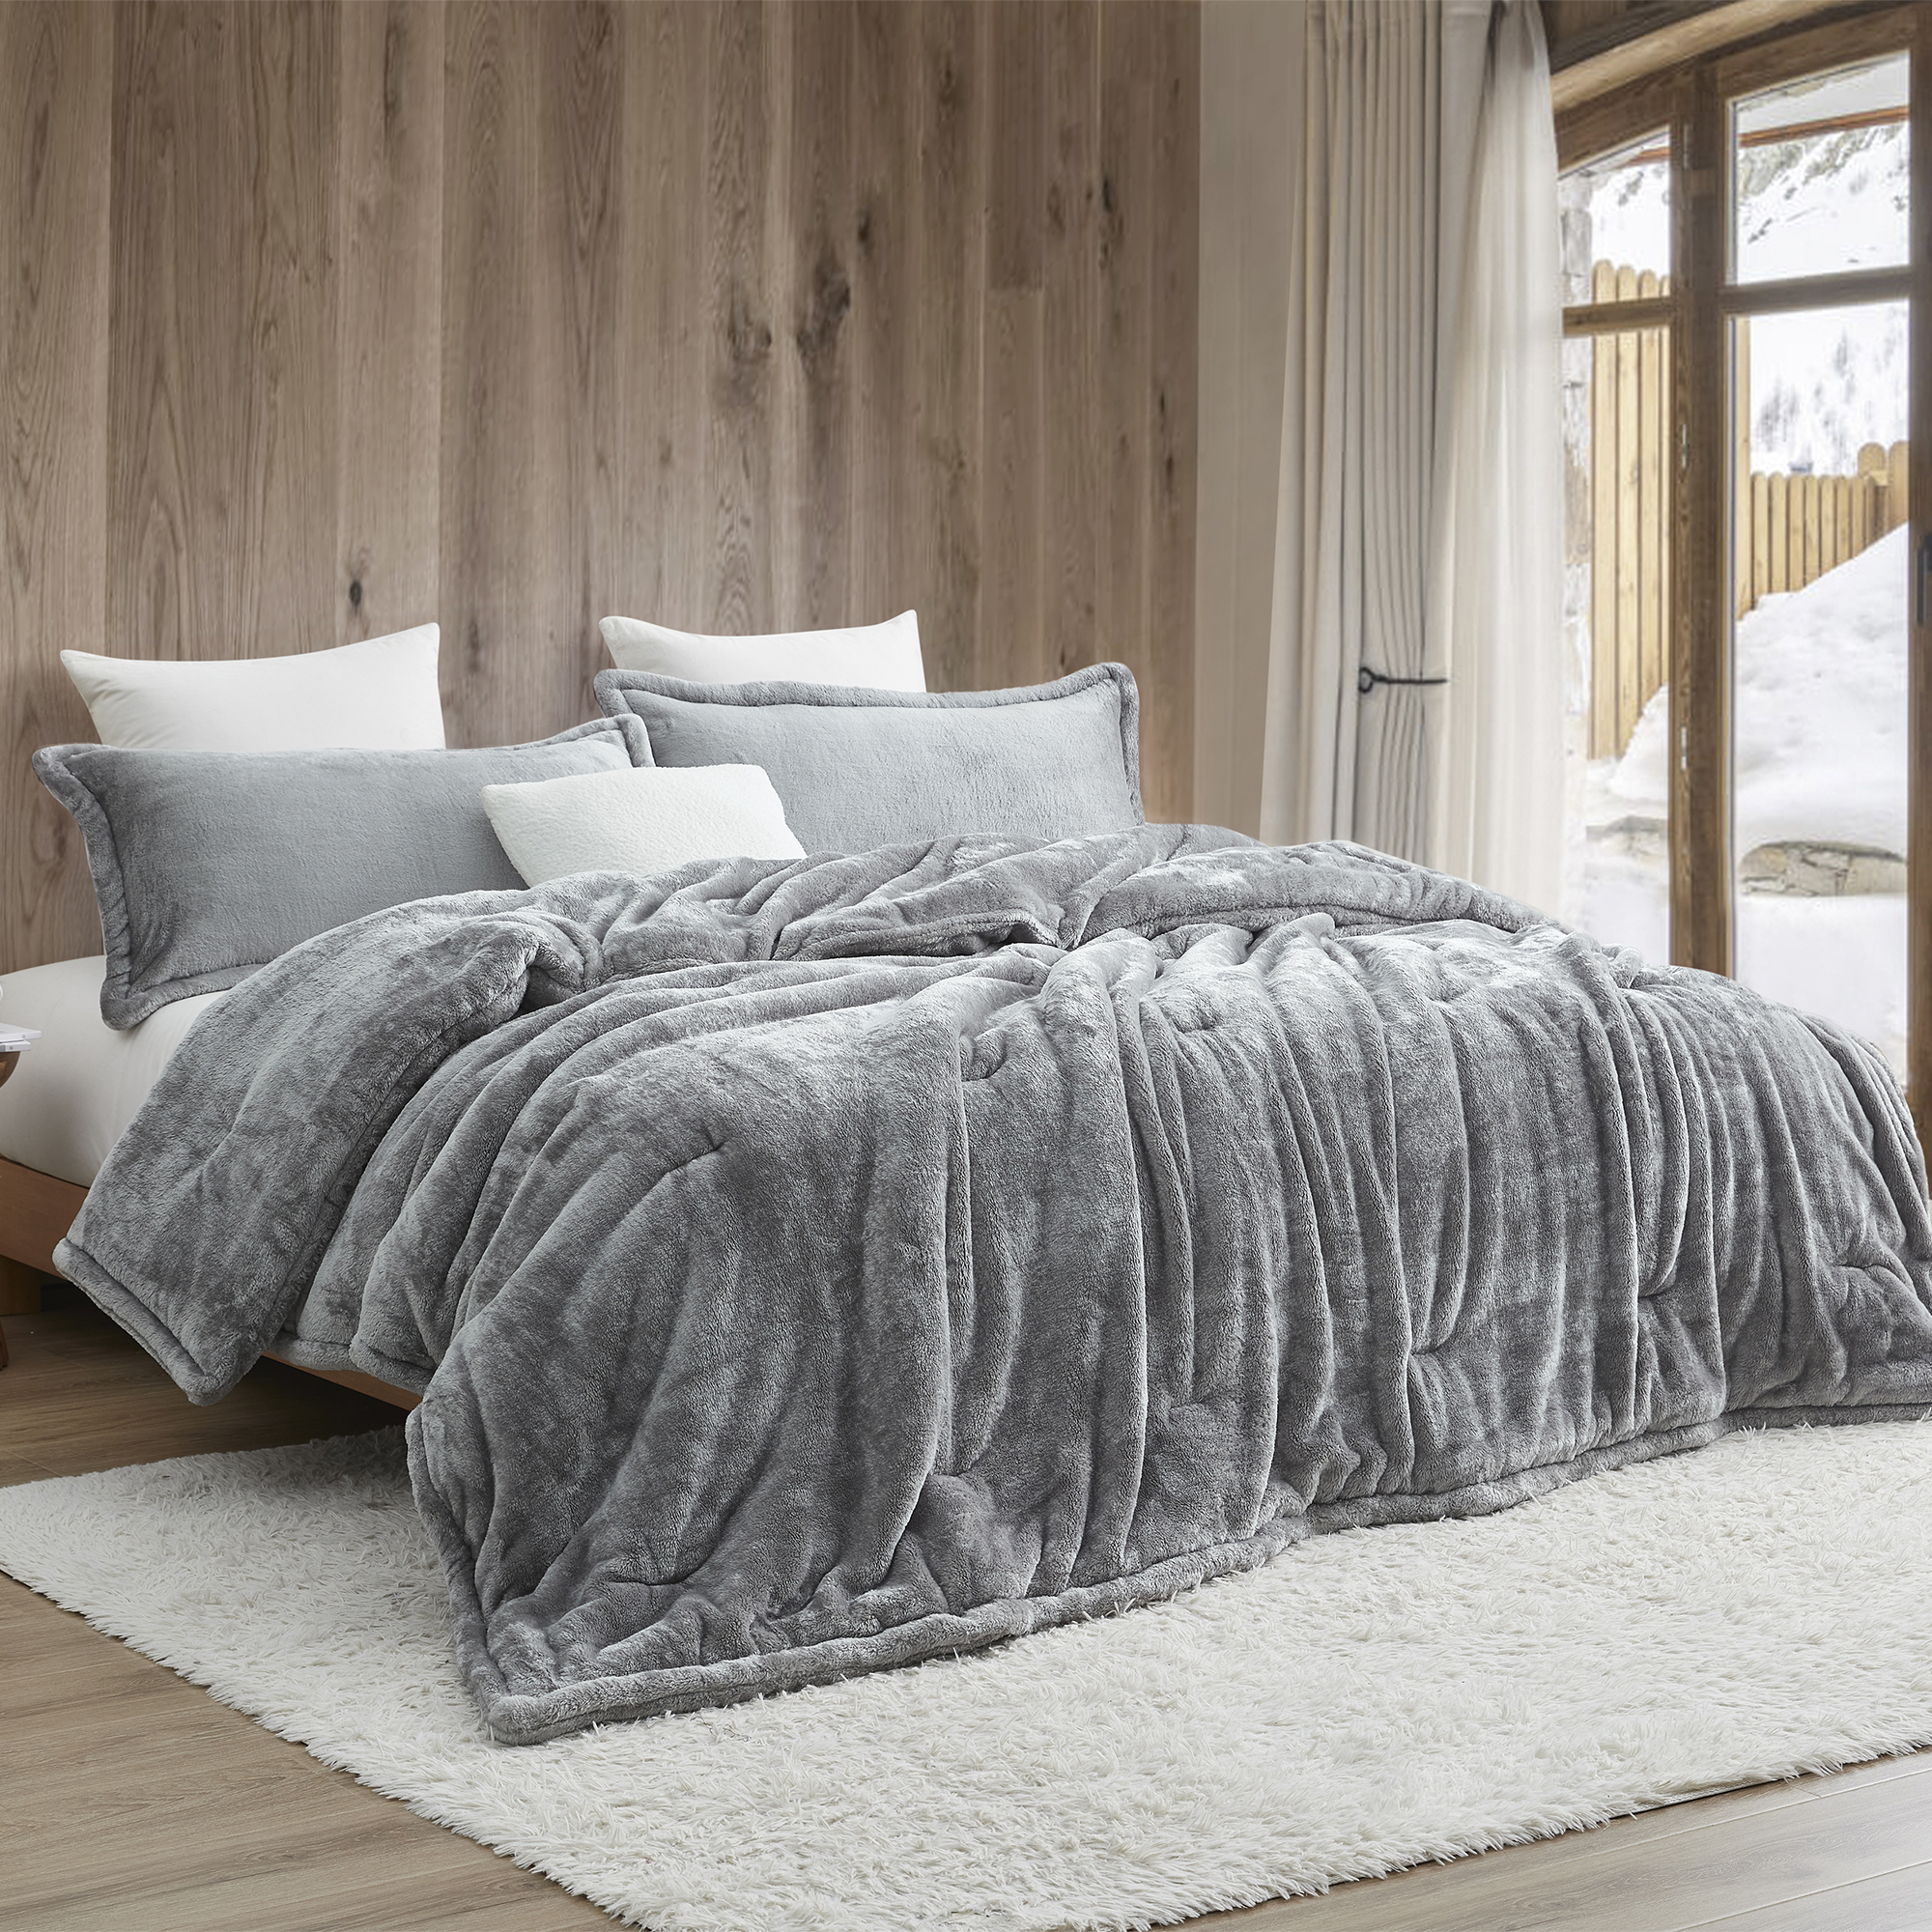 Softer than Soft - Coma Inducer® Oversized Queen Comforter - Double Plush Crystal Gray